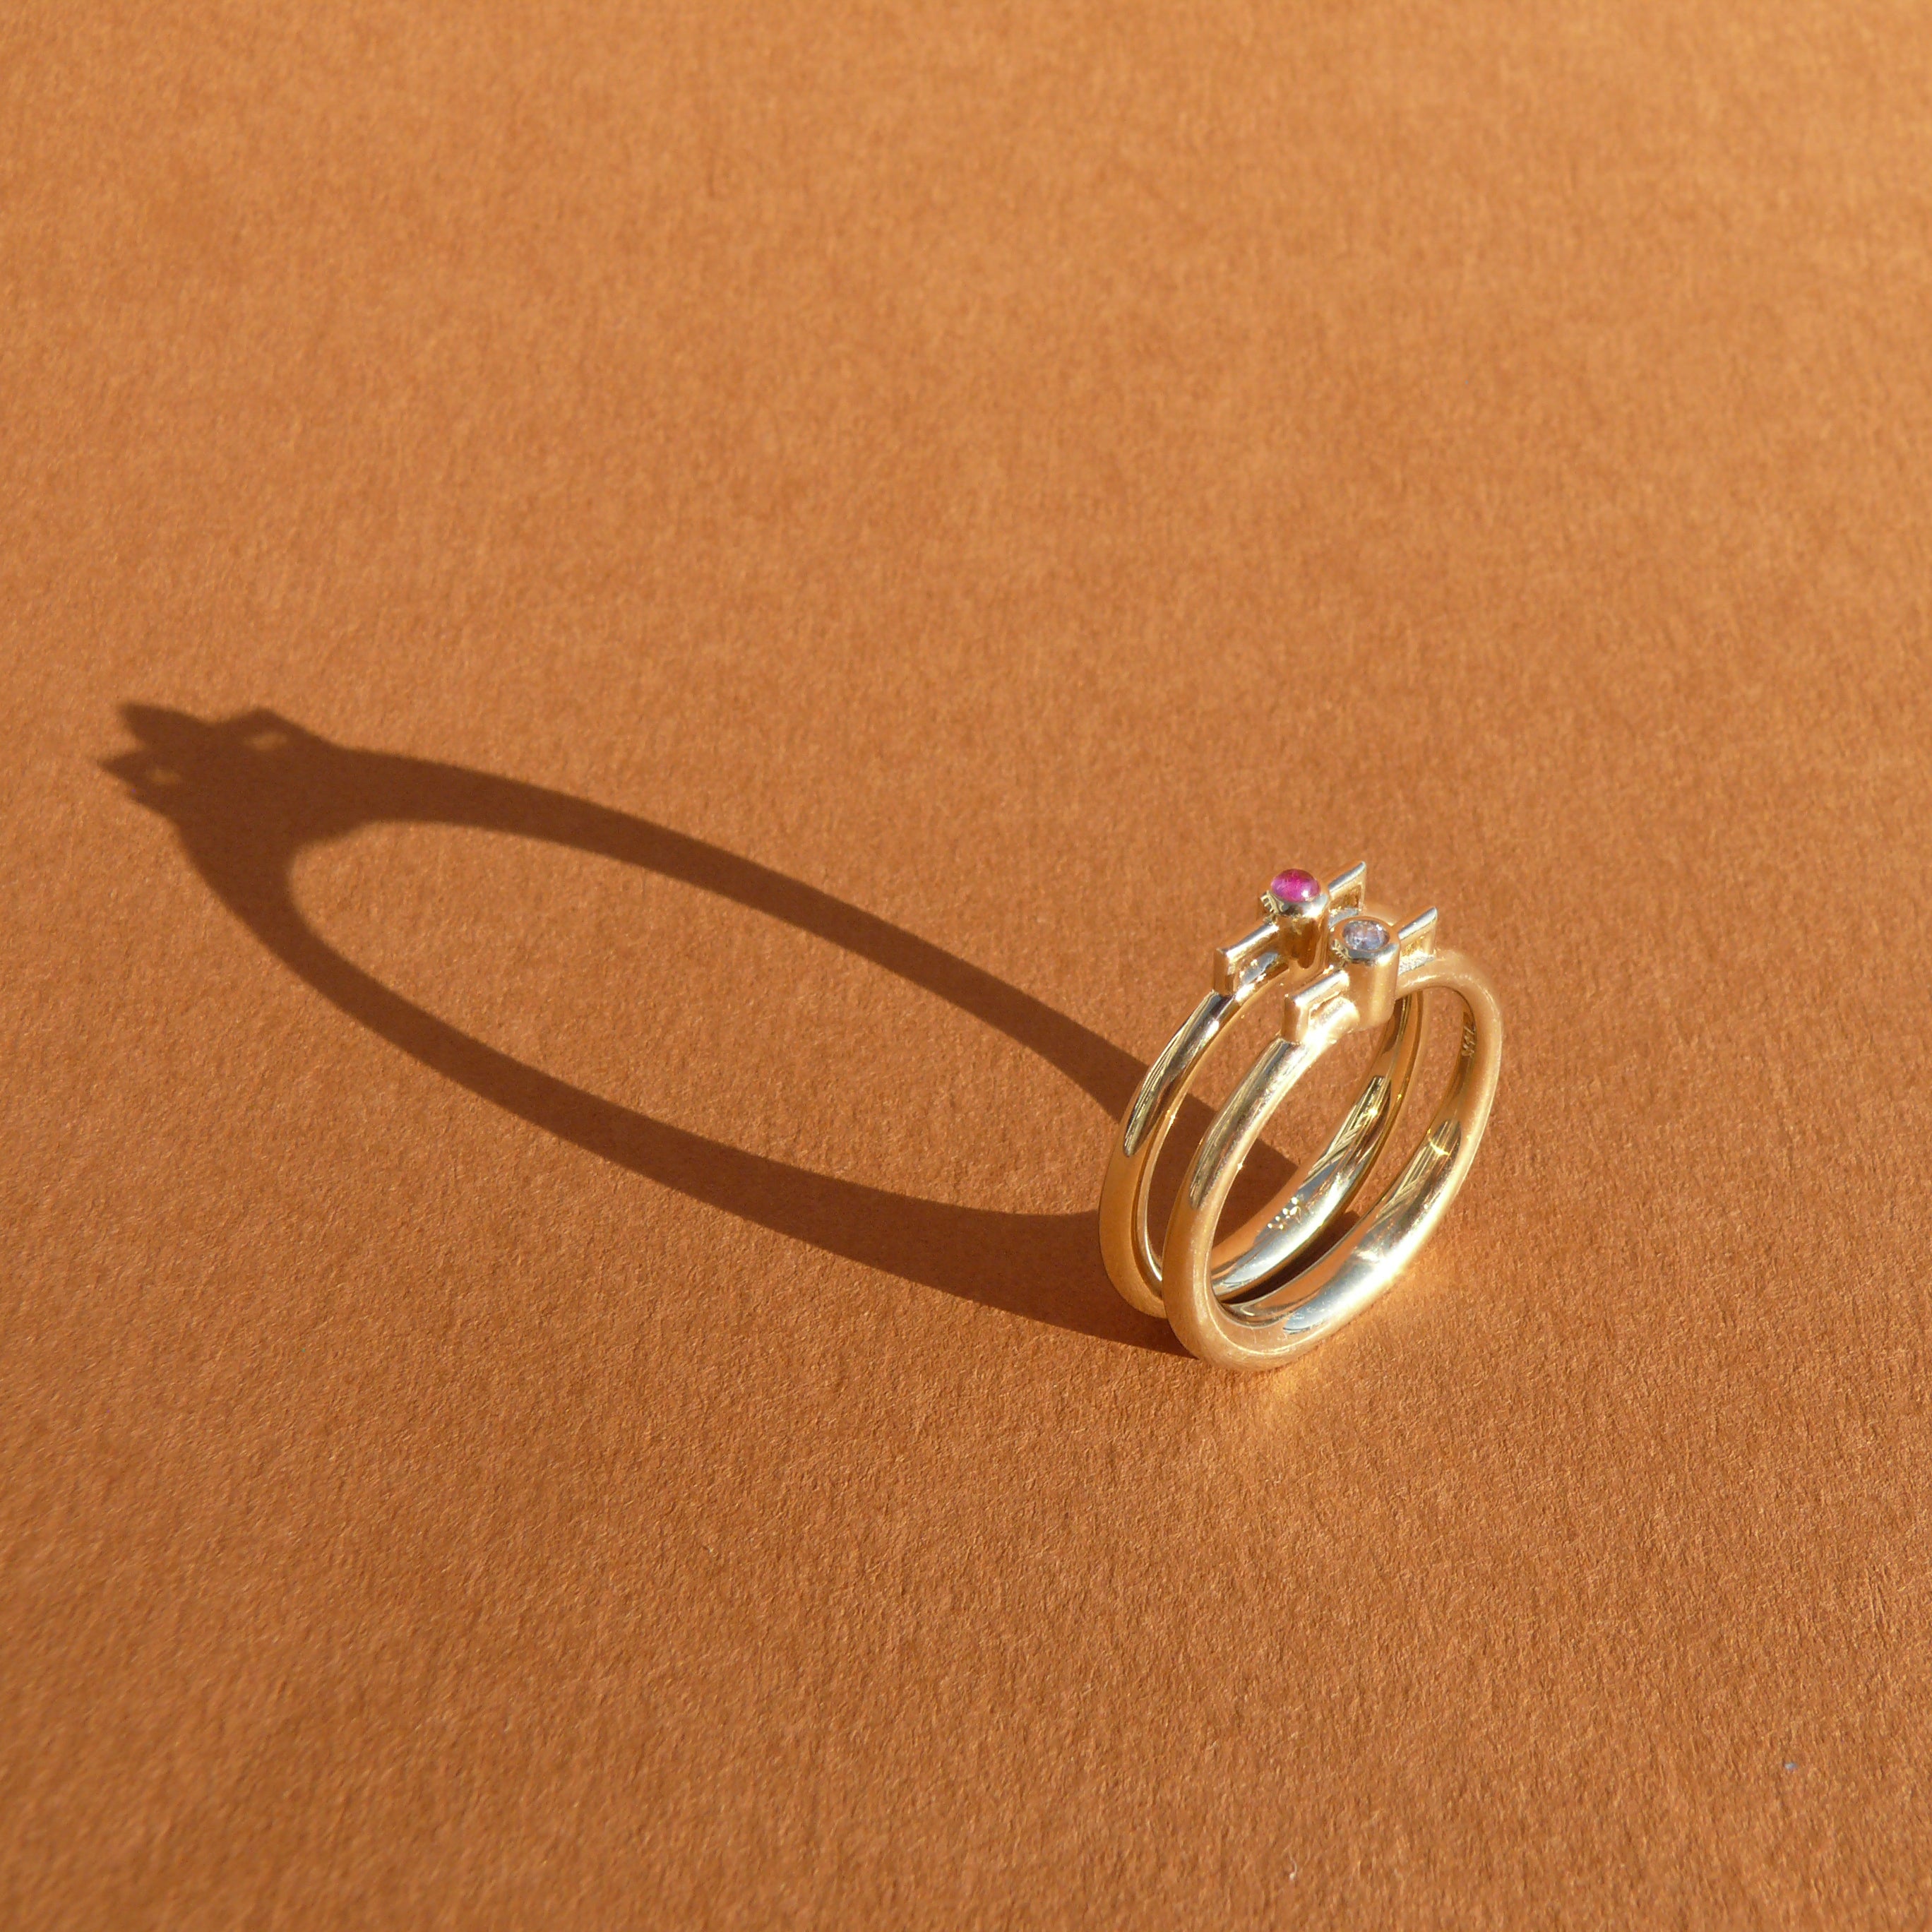 2mm Vietnamese ruby bezel set atop a 14k recycled yellow gold ring band with a silhouette of a vessel with square handles